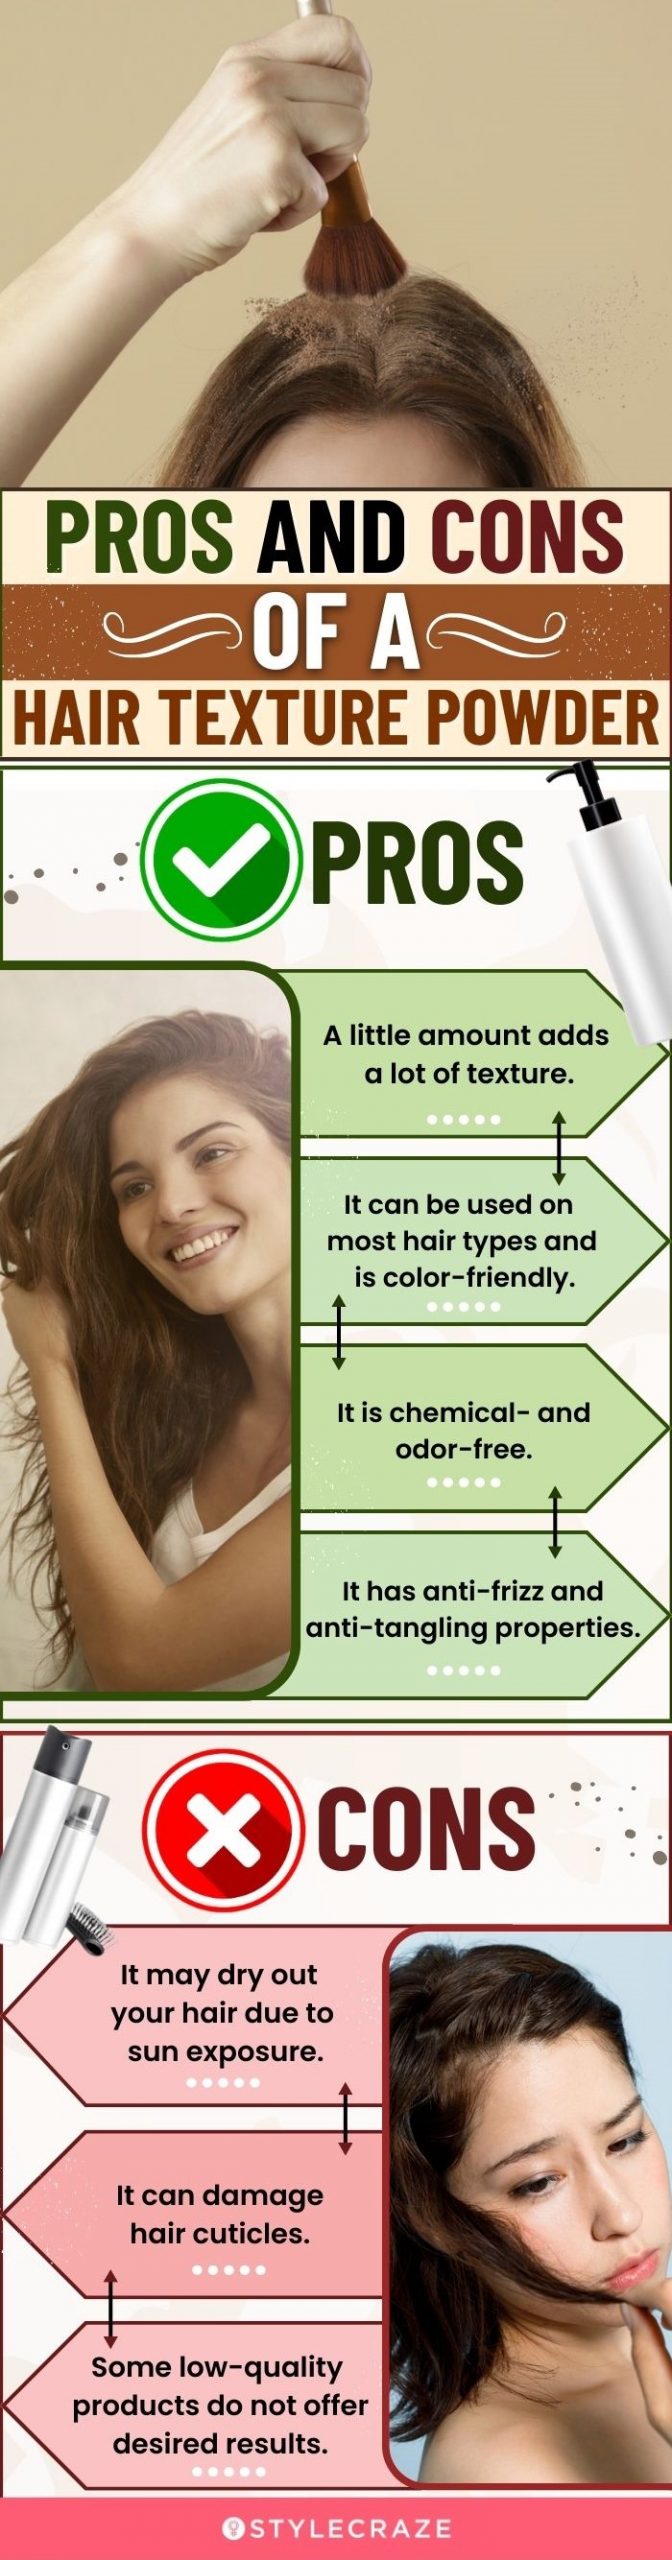 pros and cons of a hair texture powder (infographic)